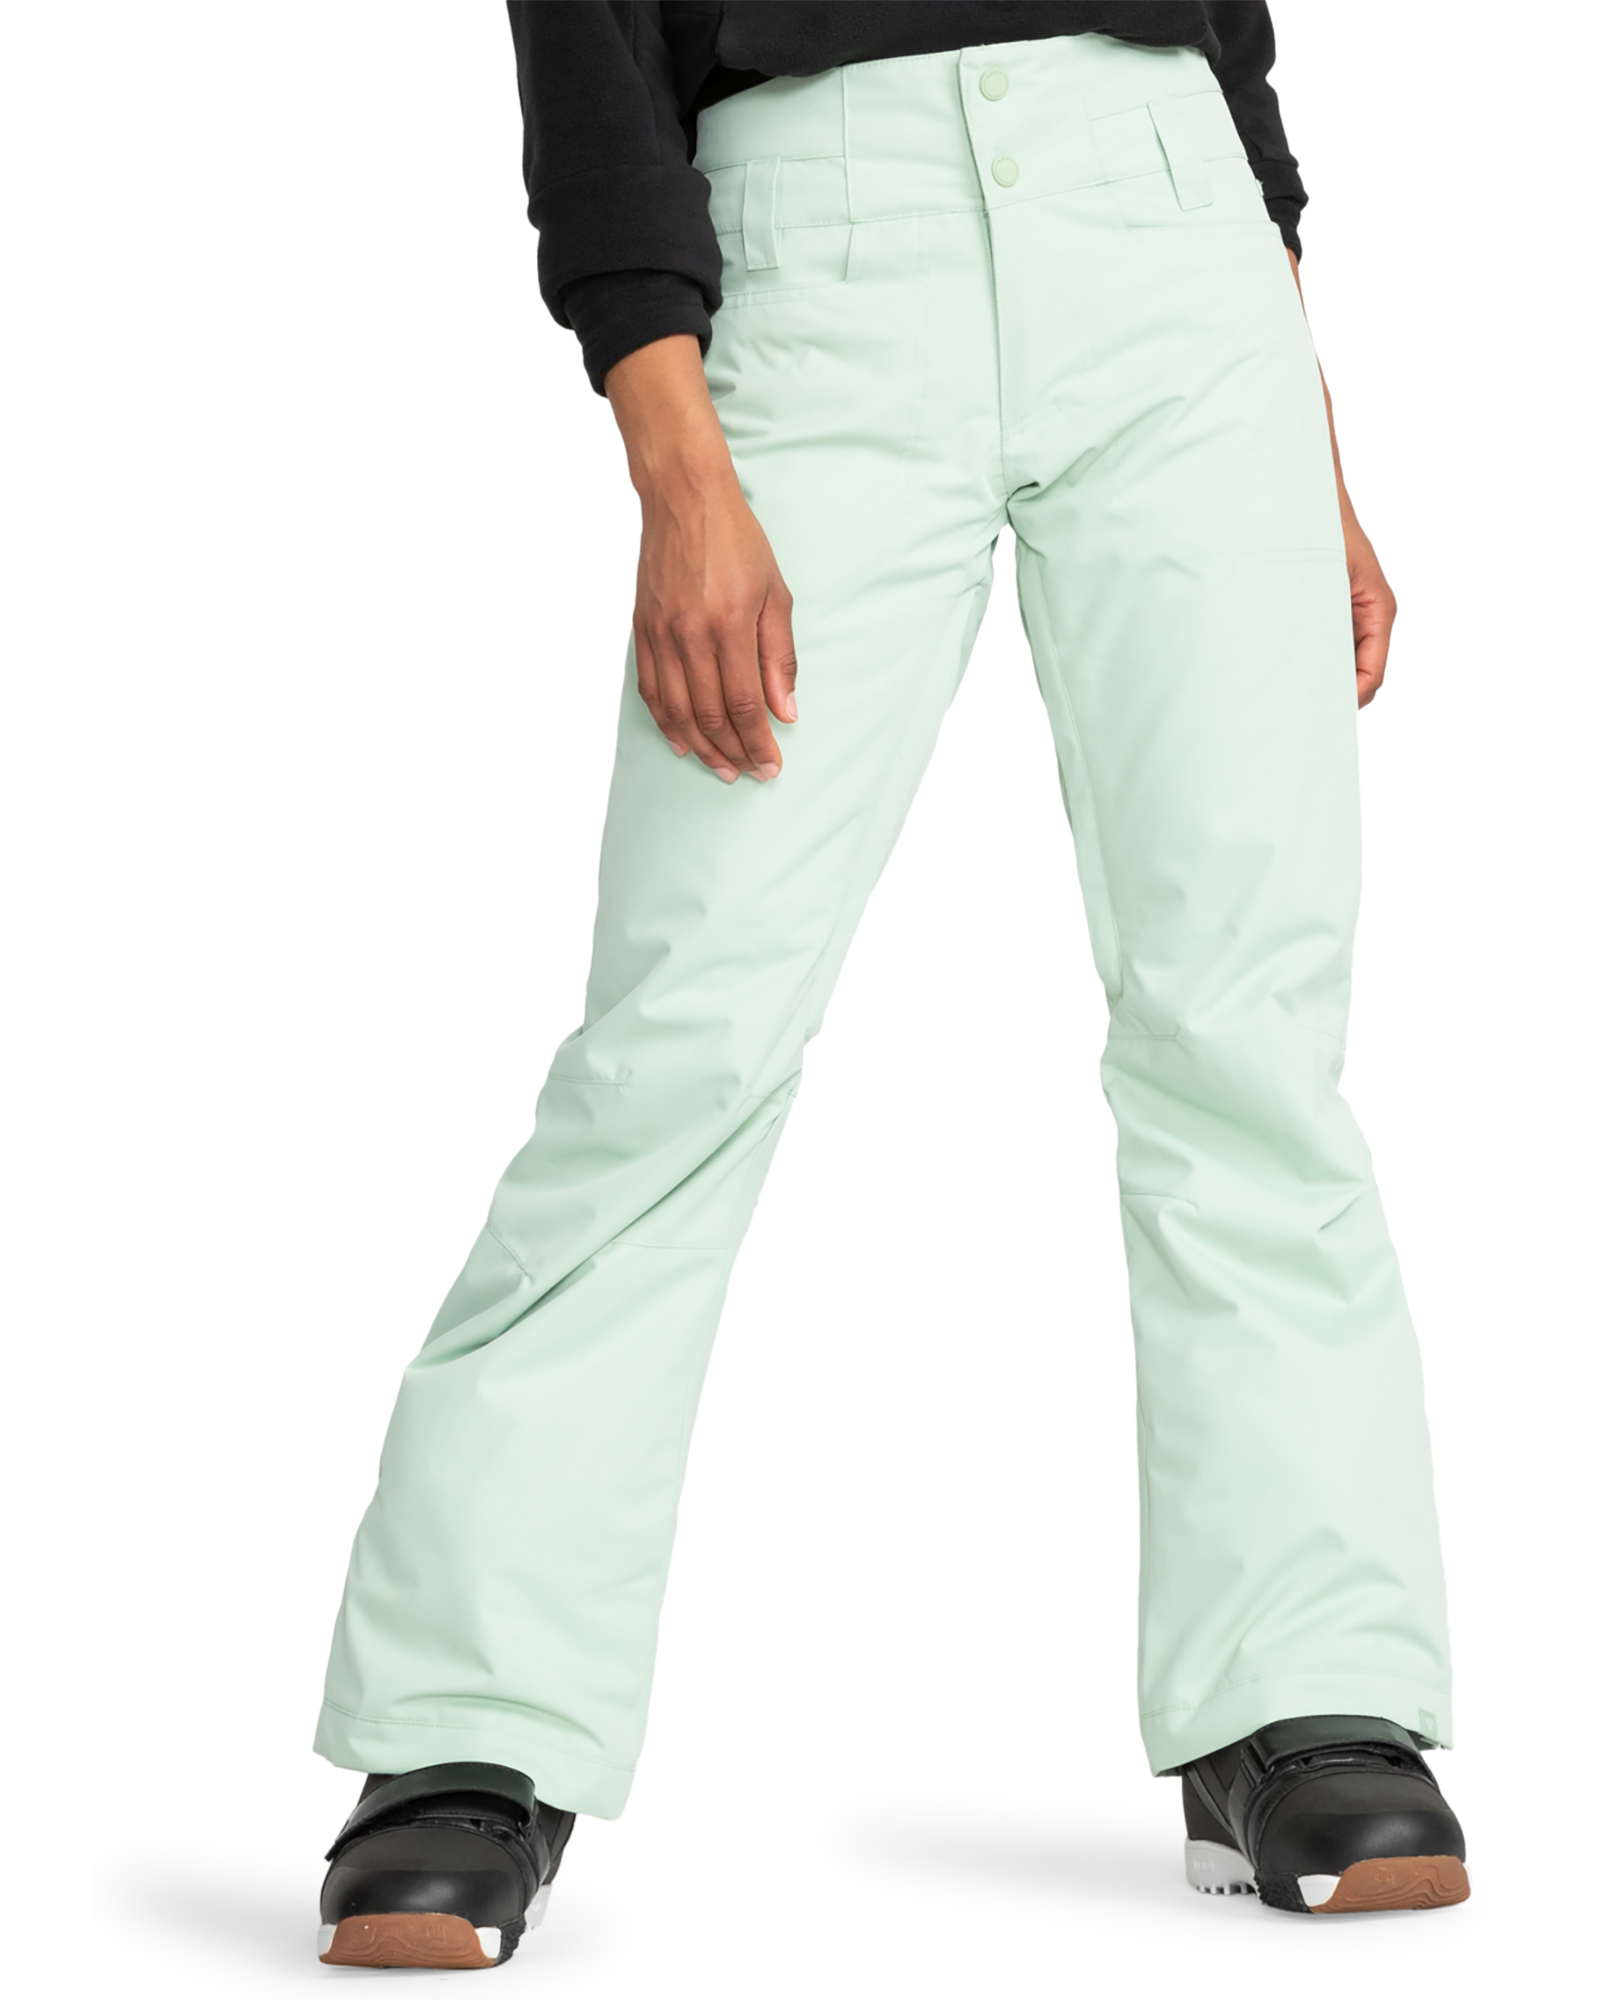 Roxy Women’s Division Pants - Cameo Green XL